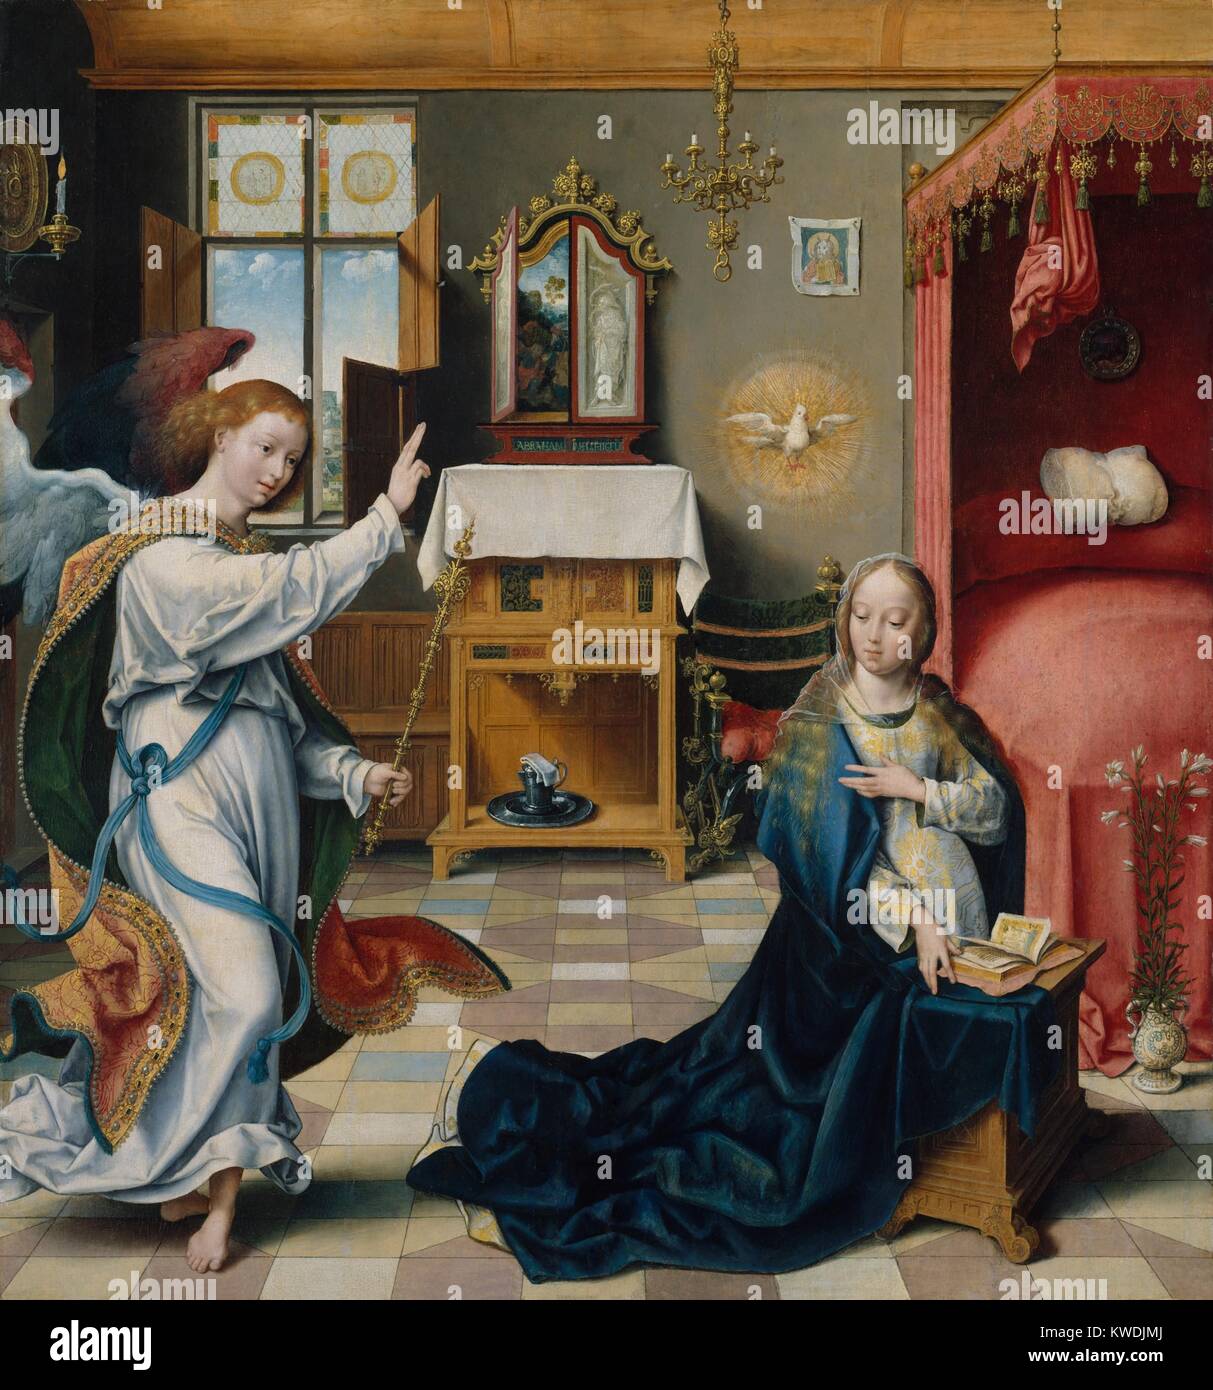 THE ANNUNCIATION, by Joos van Cleve, 1525, Netherlandish, Northern Renaissance oil painting. The Angel Gabriel and Virgin Mary within an elaborately furnished interior. The figures are painted with graceful animation and great detail (BSLOC 2017 16 92) Stock Photo